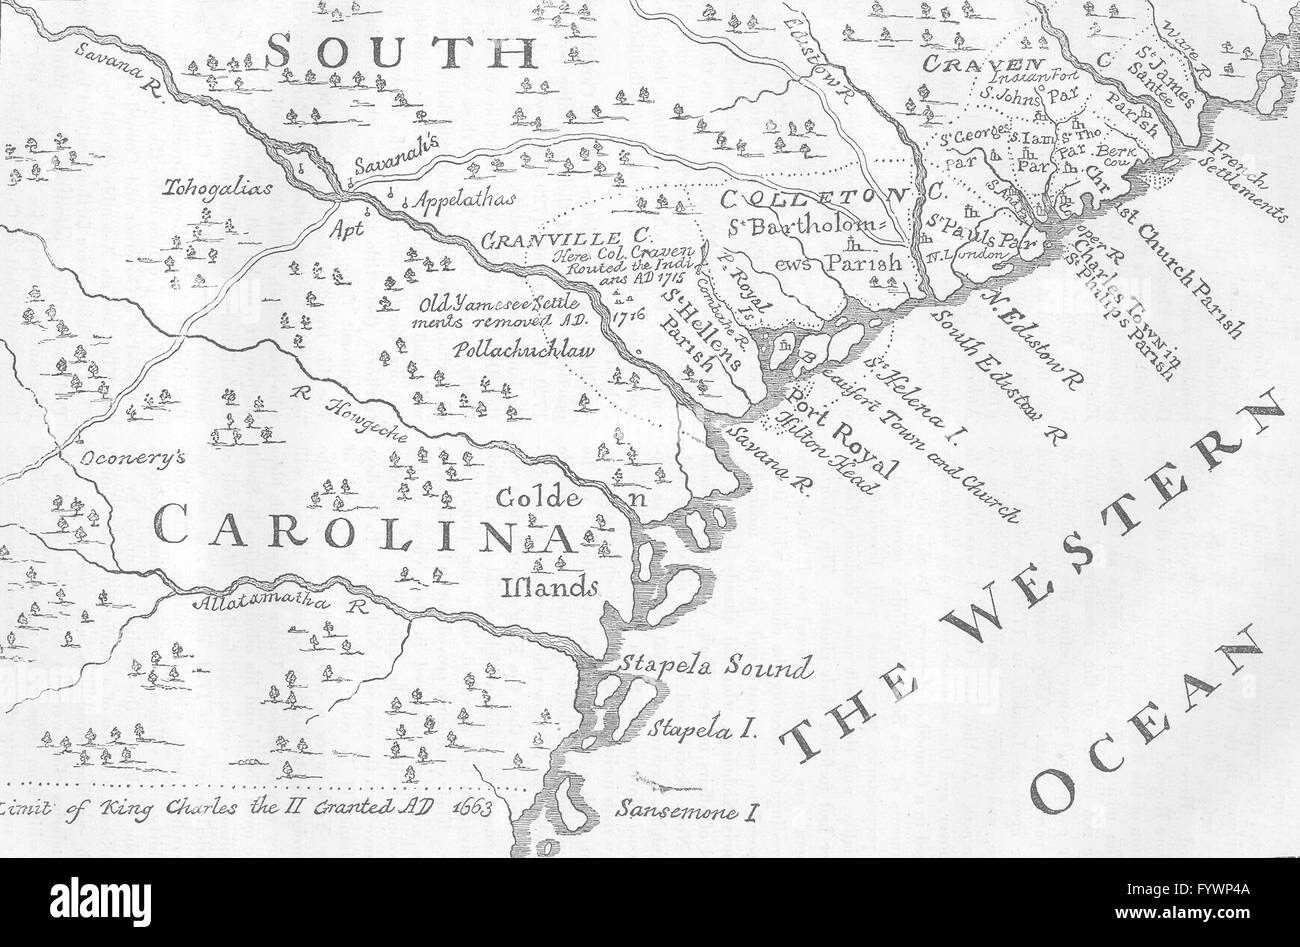 SOUTH CAROLINA: In 1730(Moll), c1880 antique map Stock Photo